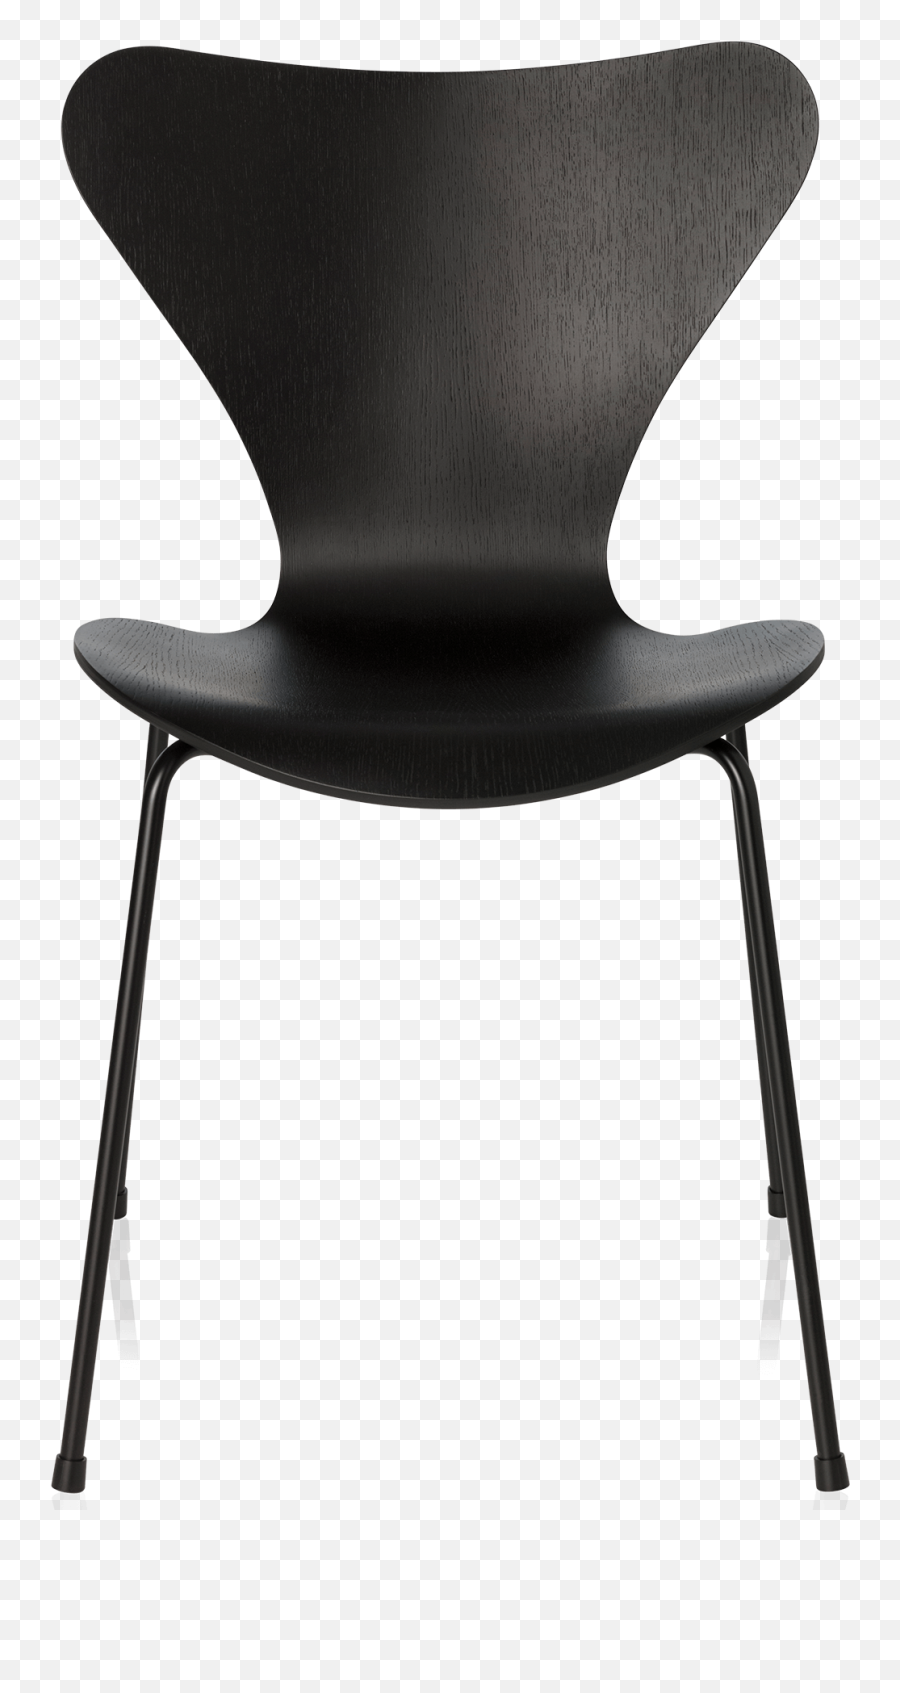 Series 7 Chair Monochrome - Arne Jacobsen Series 7 Chairs Black Png,Ash Png